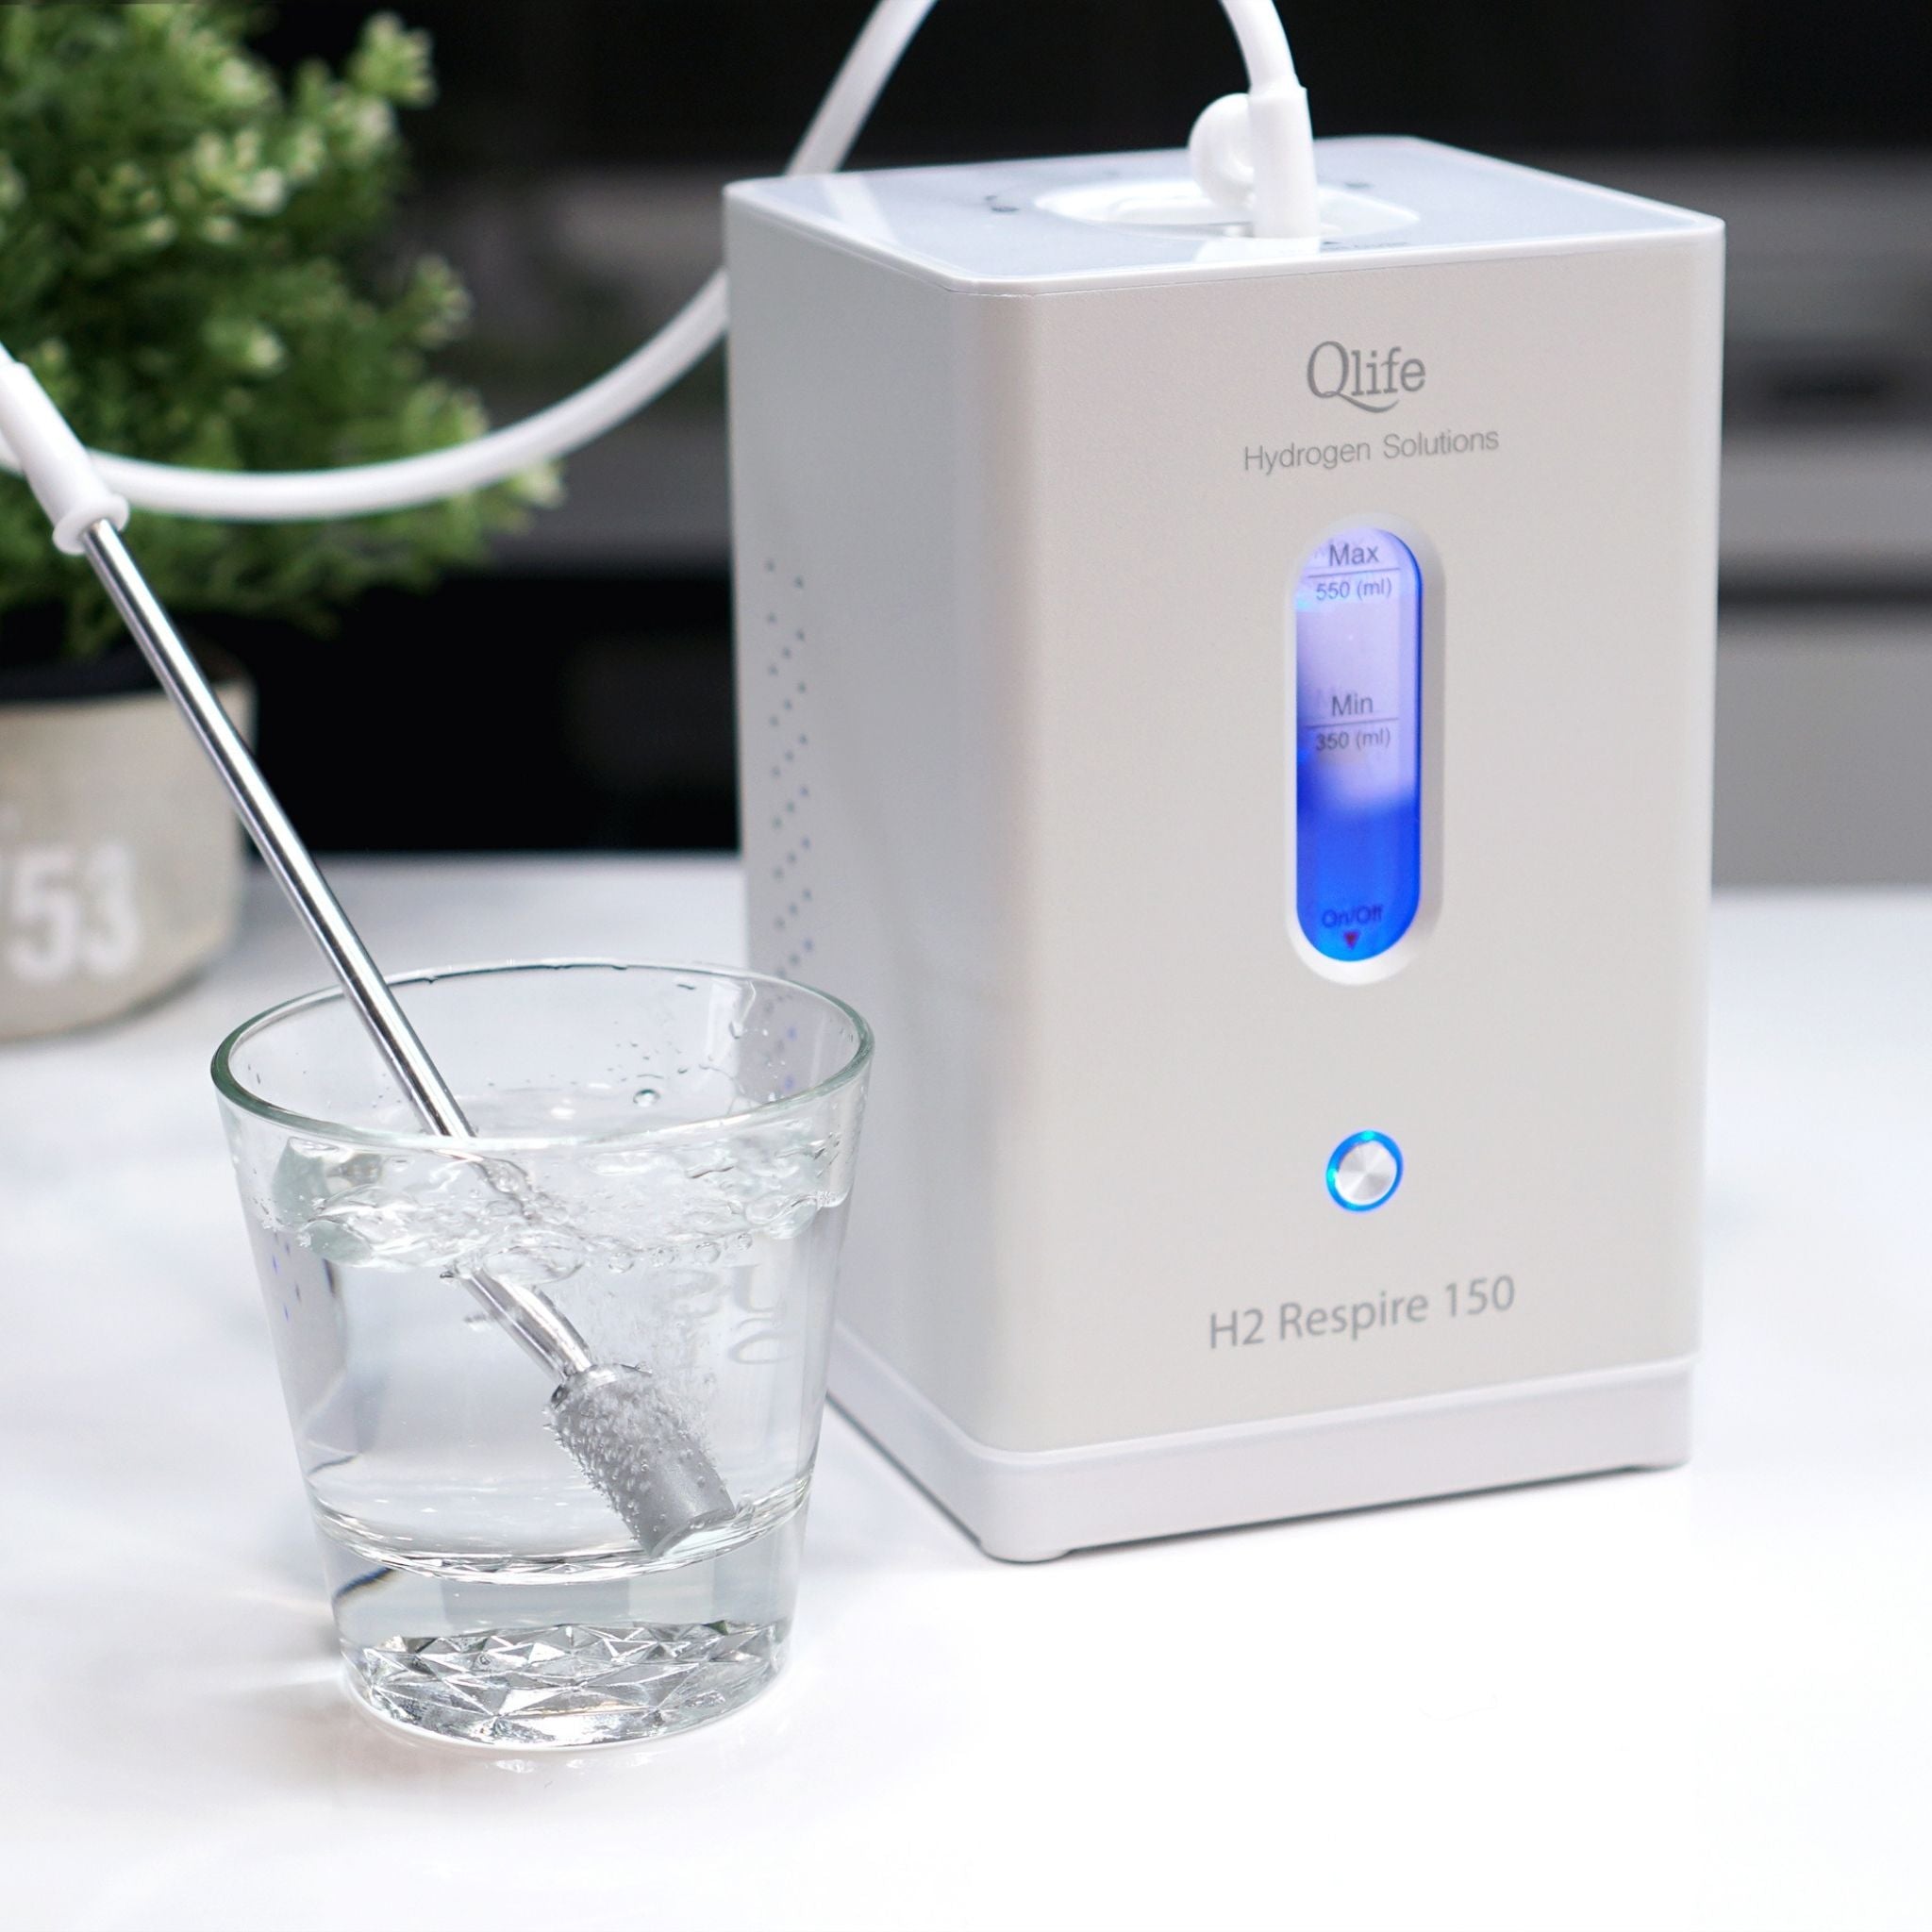 Qlife Respire 150 Generates H2 Rich Water | Safe Serene Space Canada